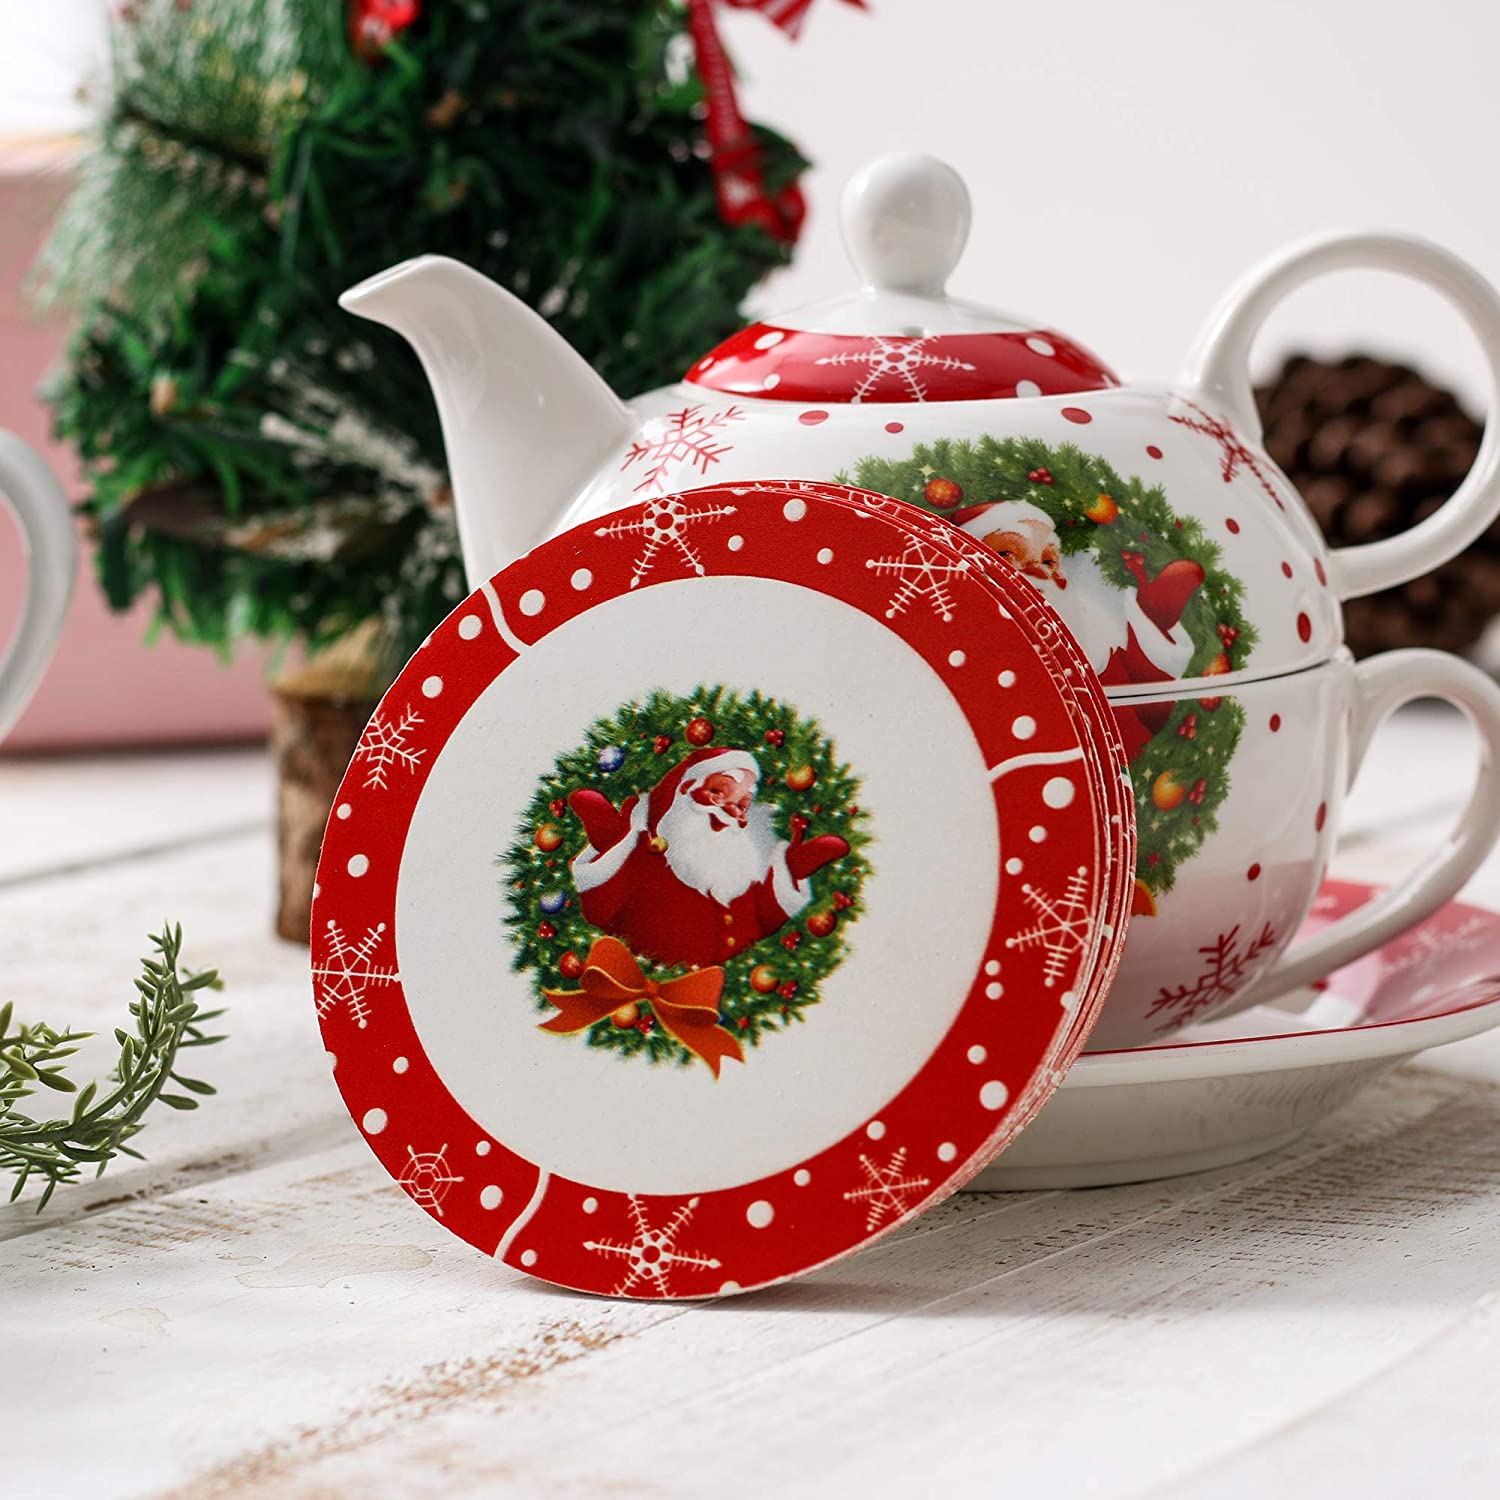 VEWEET Christmas 6 Piece Coasters, Saucers for Coffee, Tea, Beer, Wine etc. Ideal for Christmas, Cafe, Bar and Family